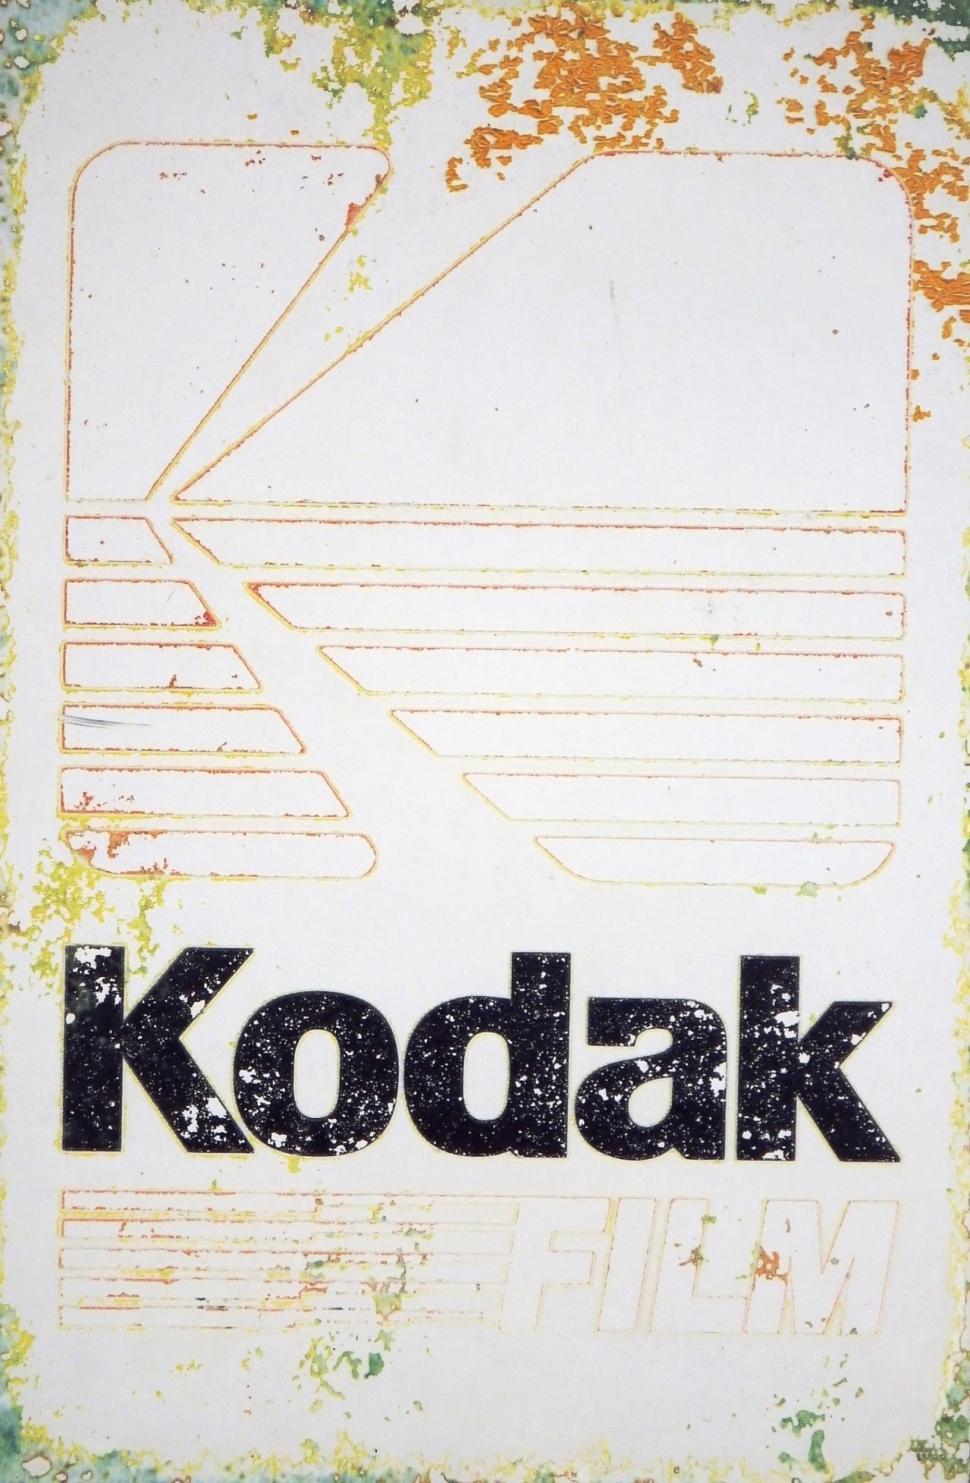 Free Image of Vintage aged advertising sign board for the Kodak camera brand  